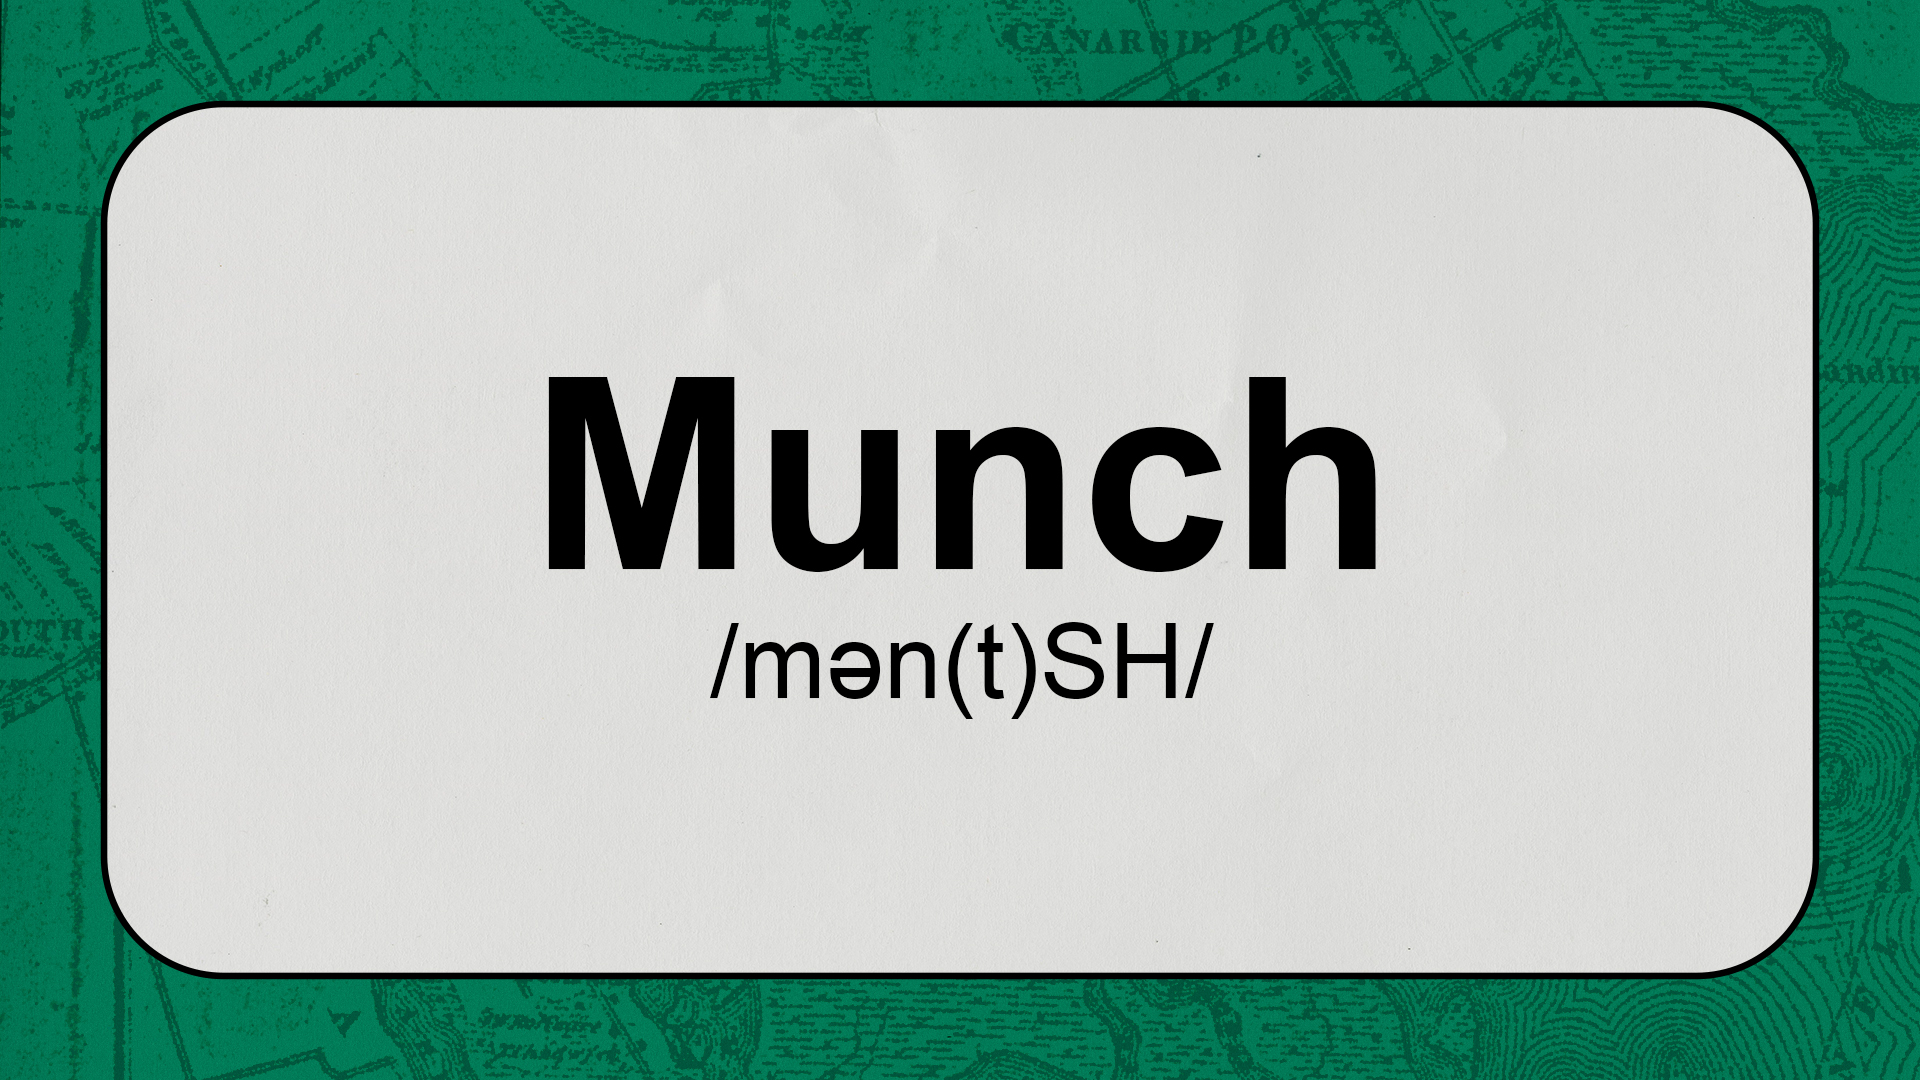 Munching  Definitions & Meanings